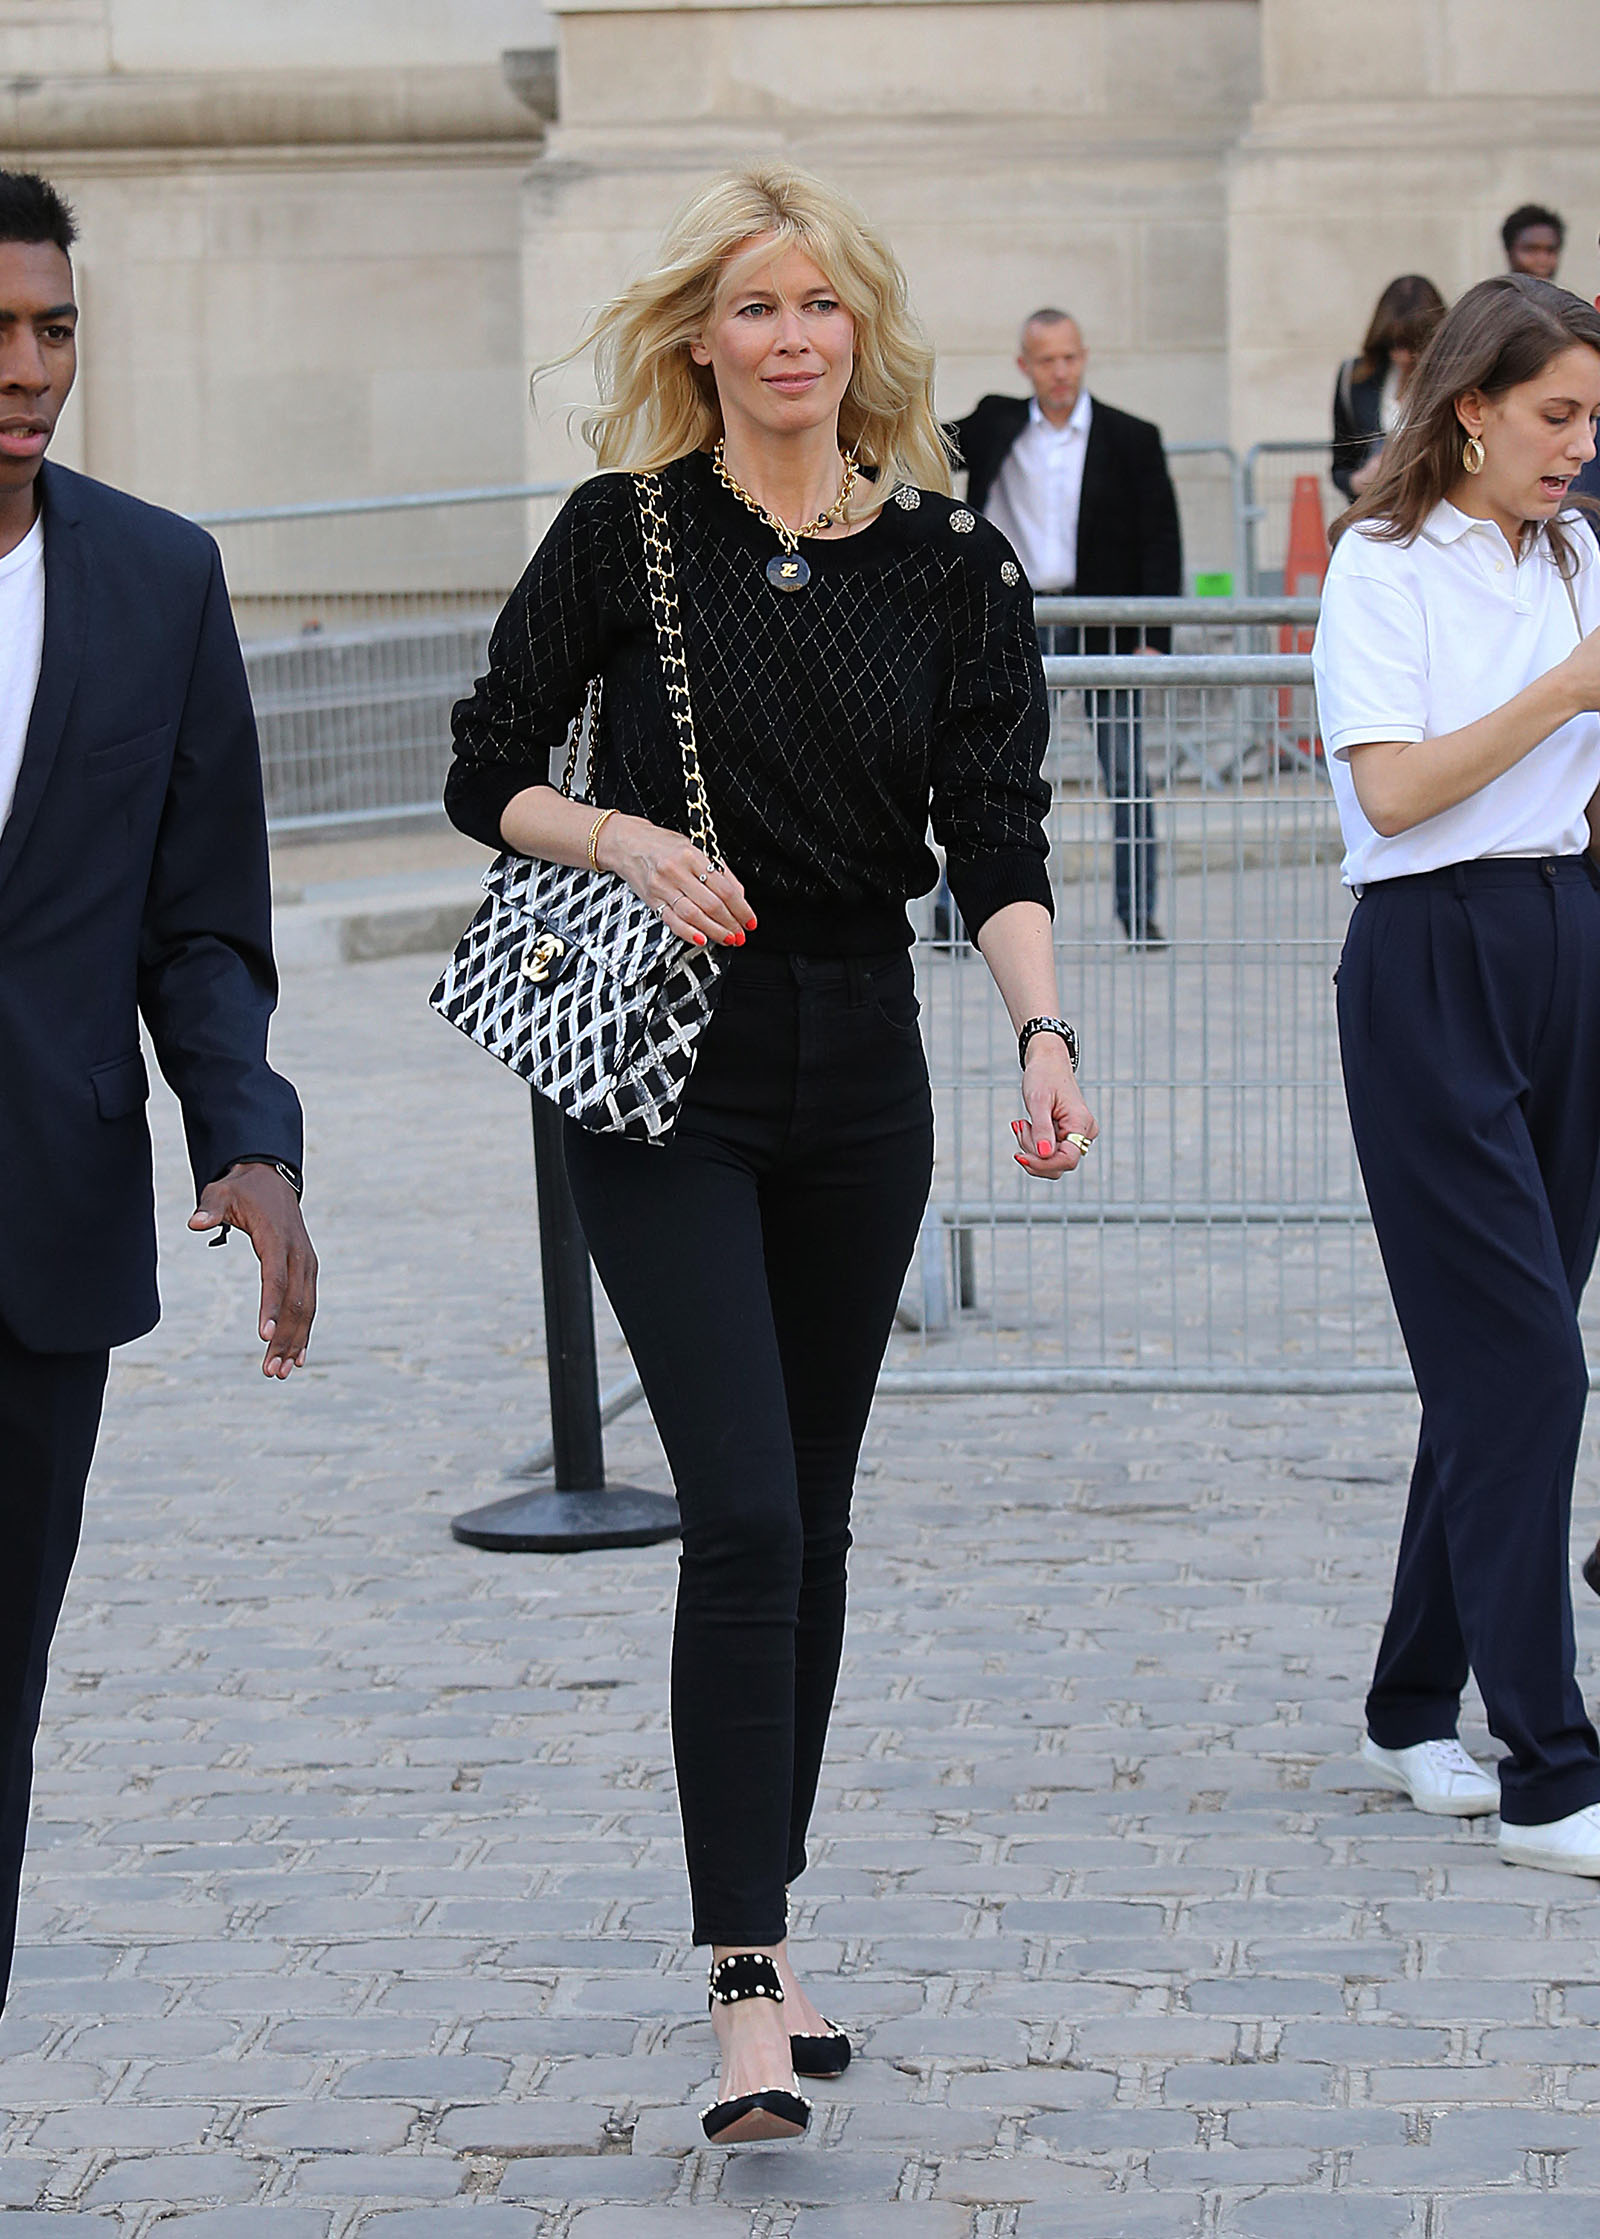 Claudia Schiffer stuns in Chanel accessories and all black outfit!